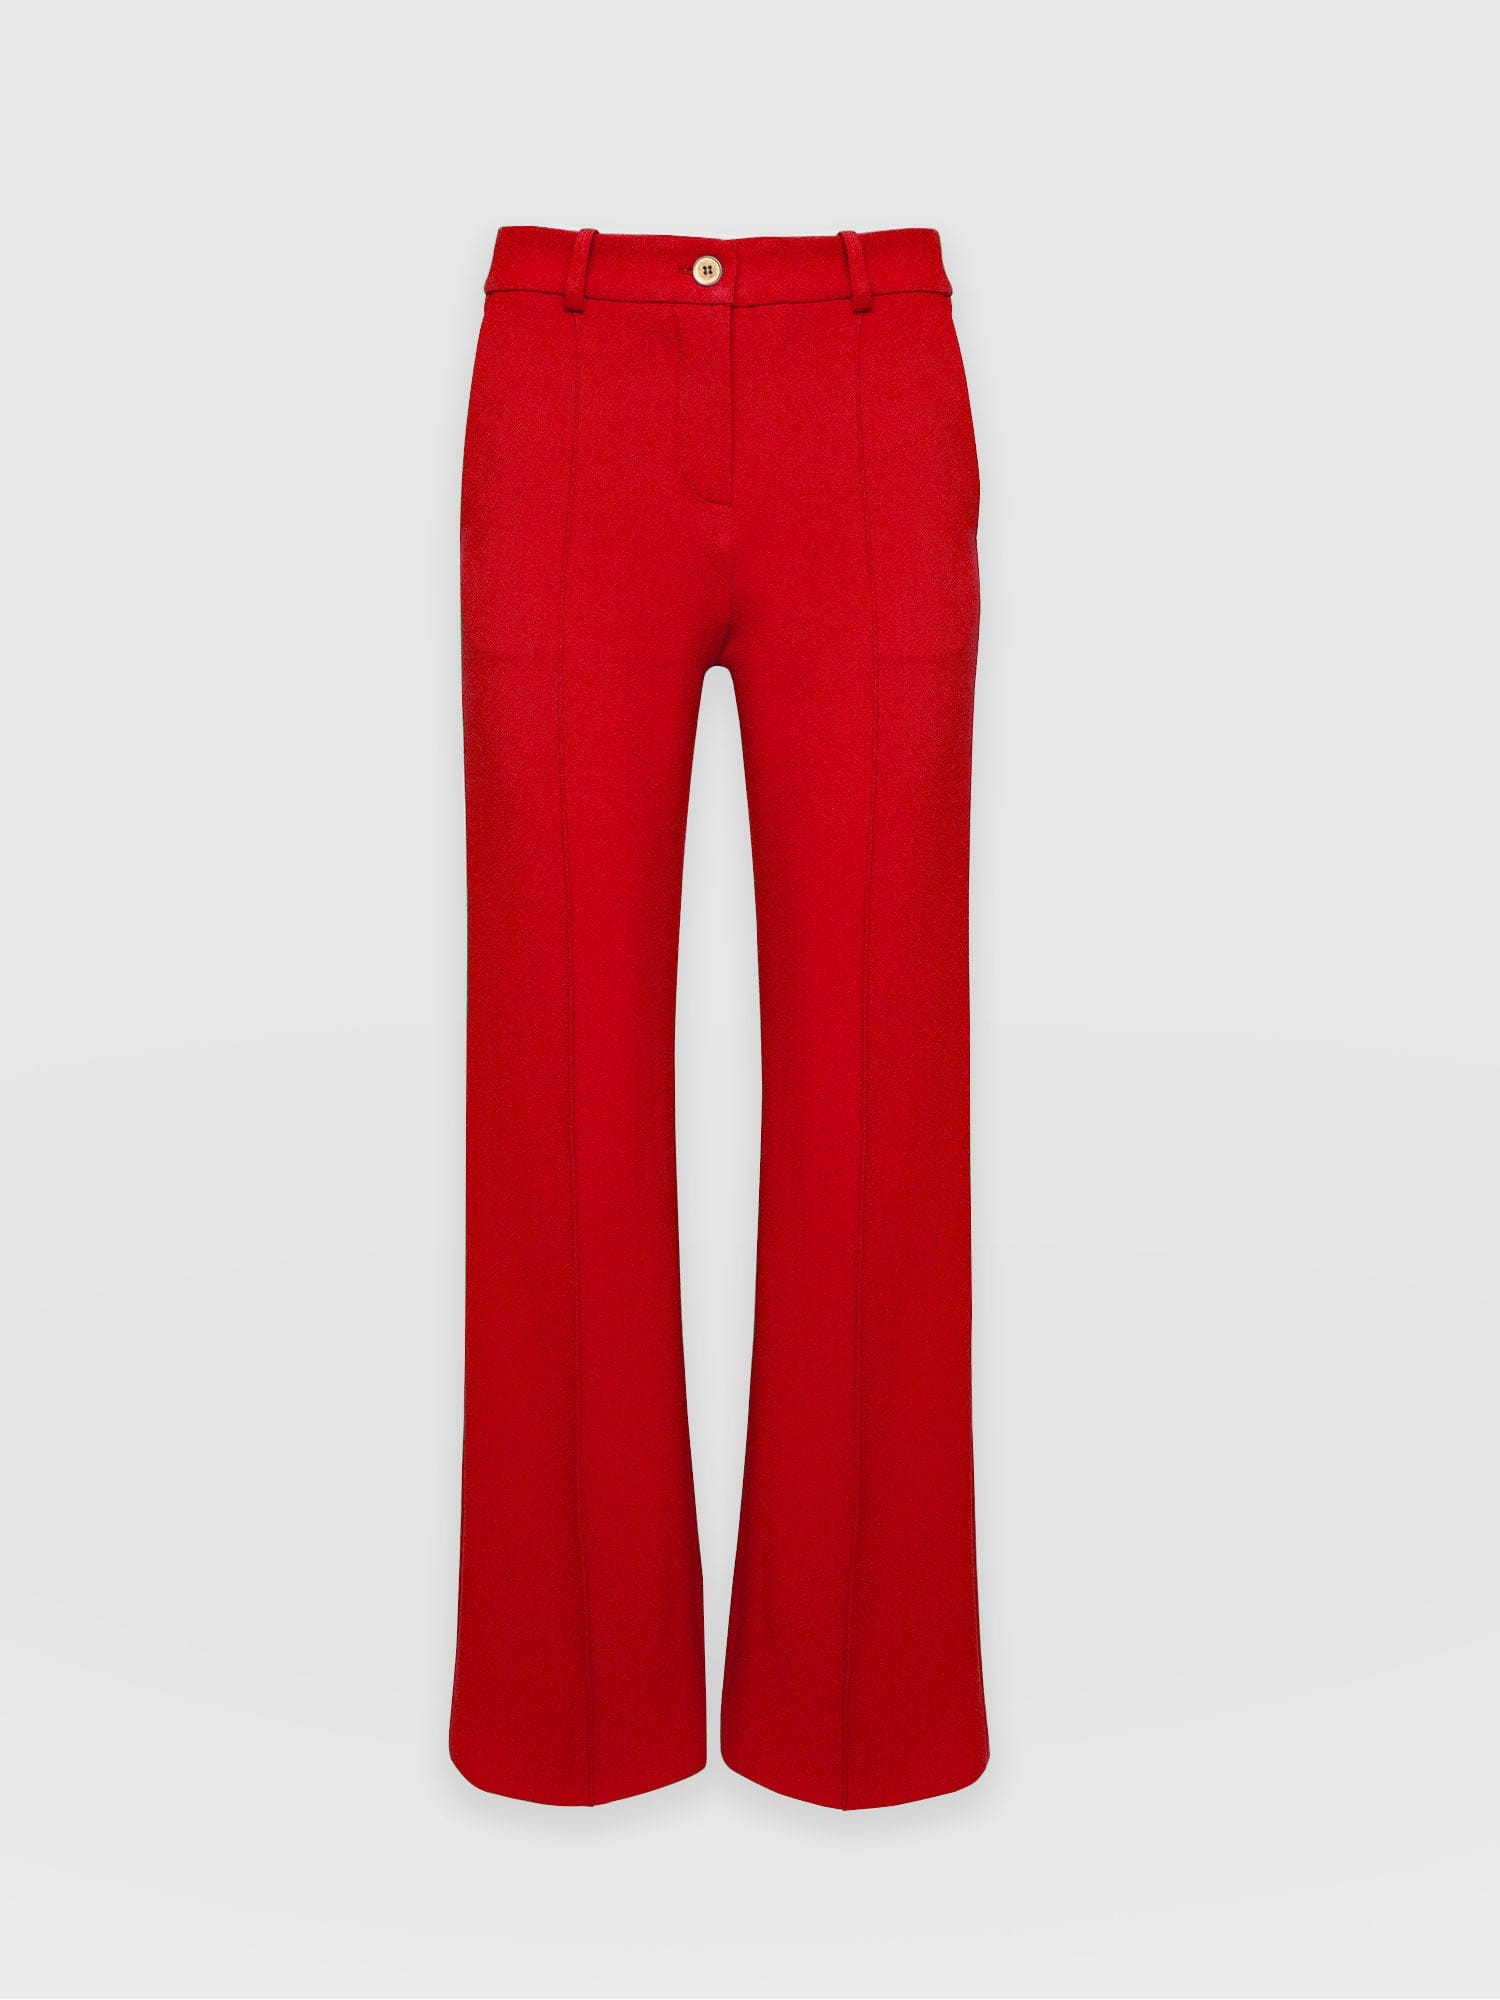 Mango tailored trousers with front seam in red | ASOS